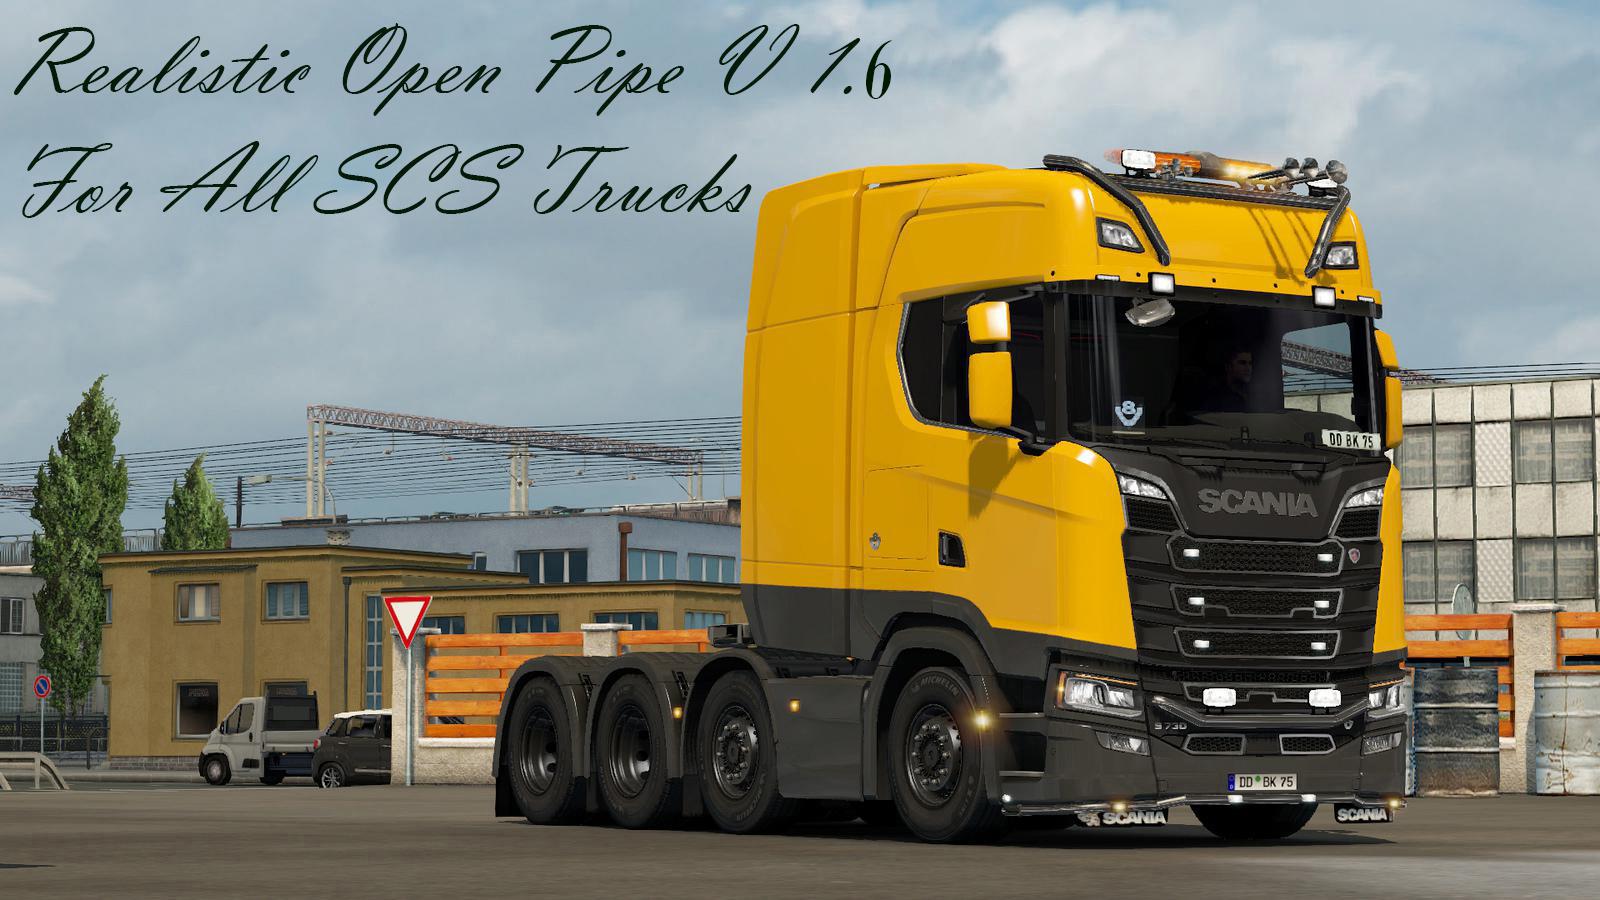 ETS2 - Realistic Open Pipe V1.6 for All Scs Trucks (1.35.X)